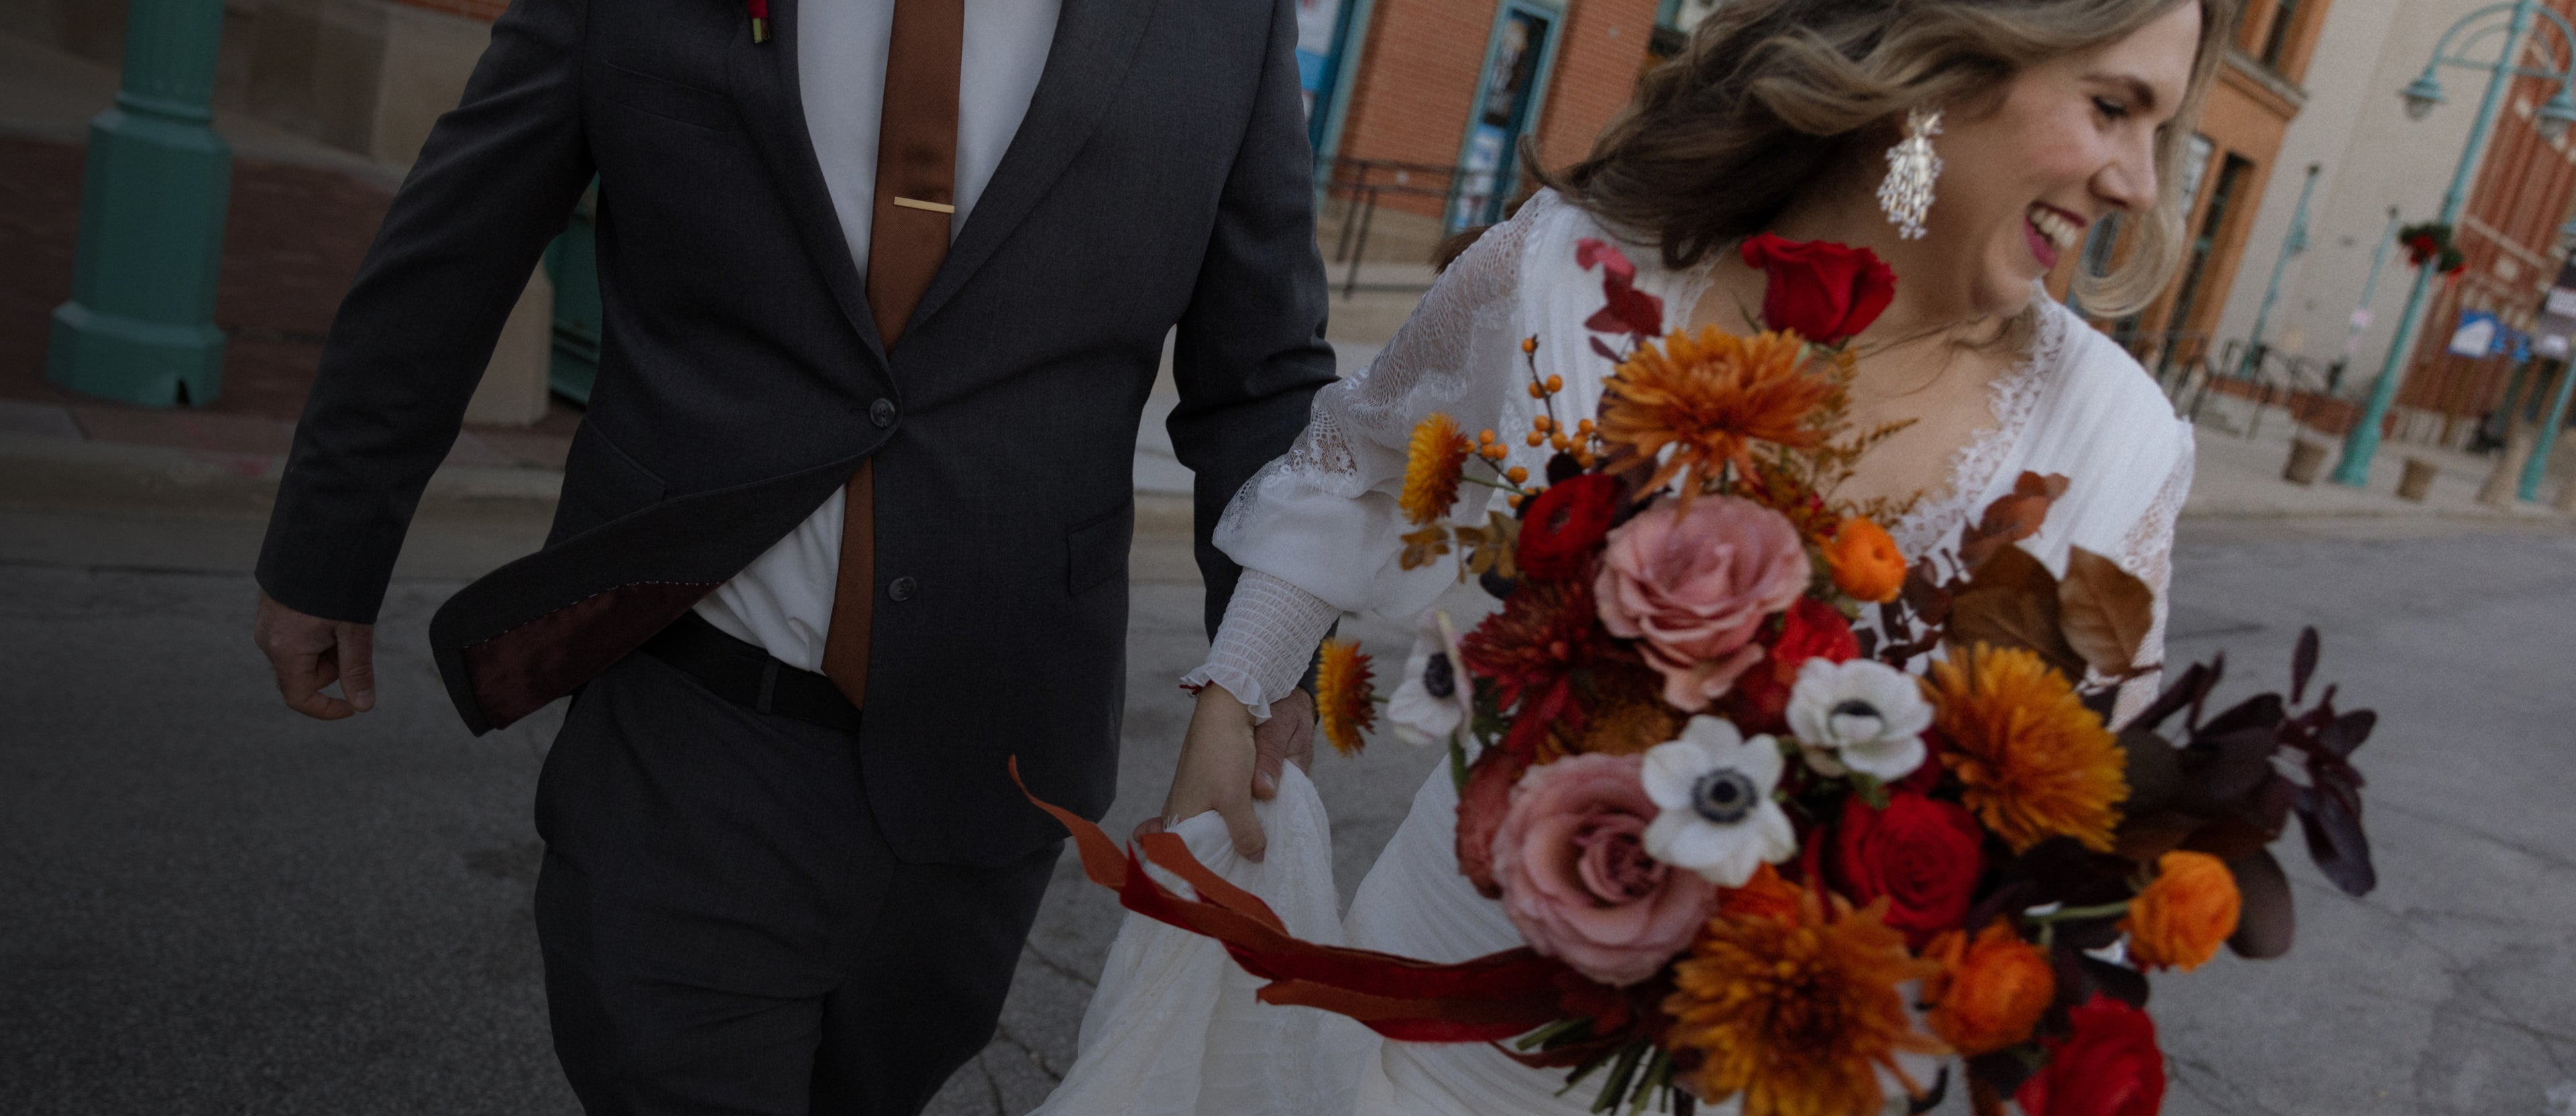 A bride running down a city street smiling, holding a large bouquet of flowers while her groom follows her